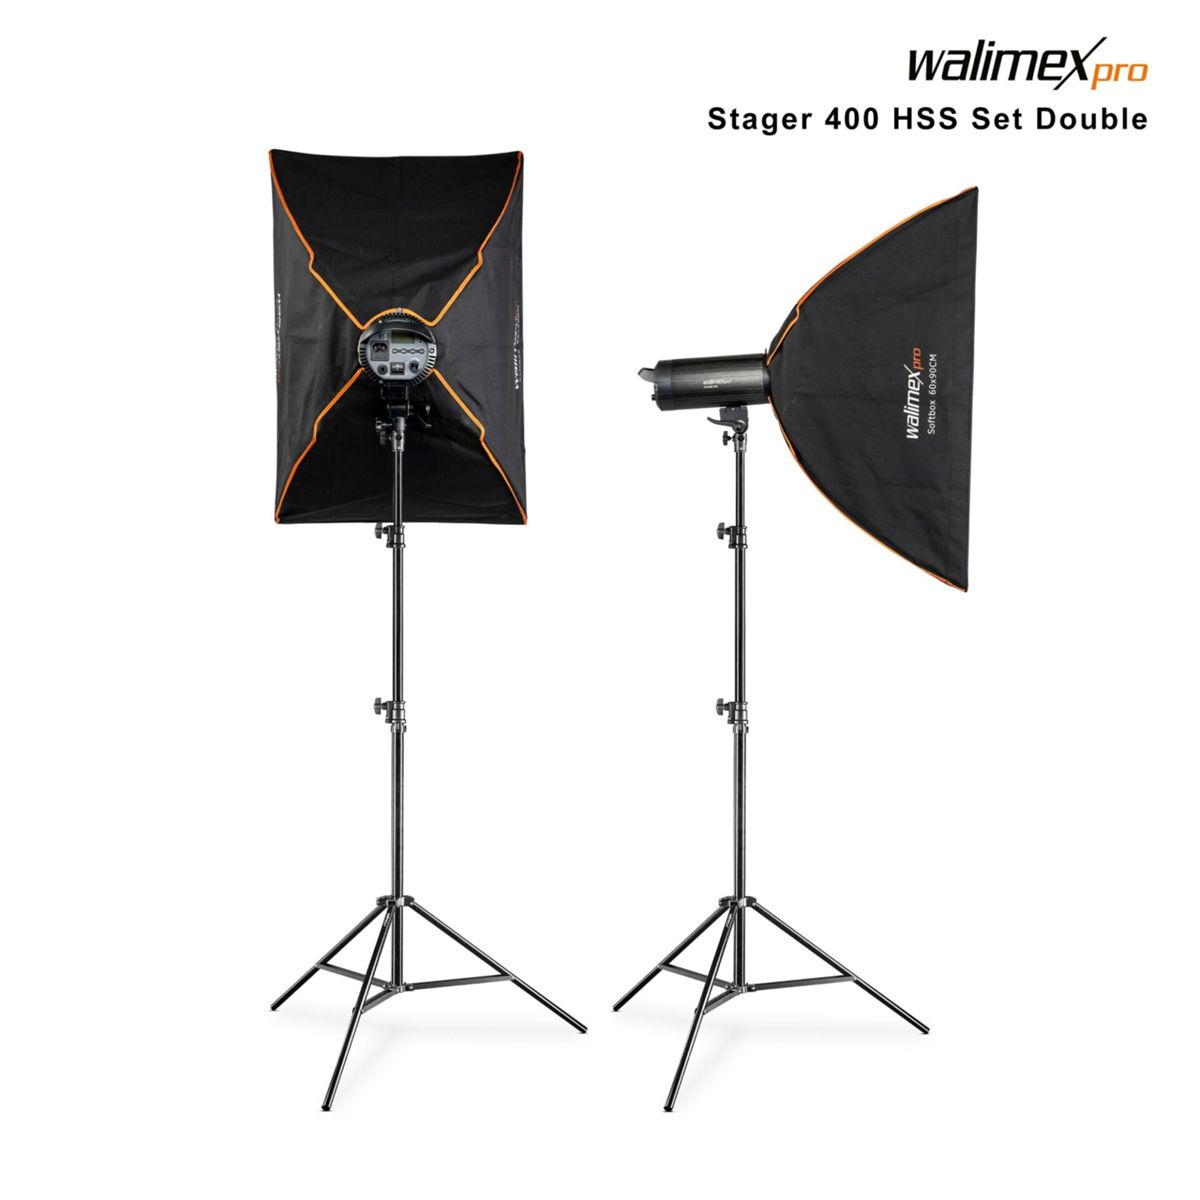 WALIMEX HSS Double 400 pro Stager Set